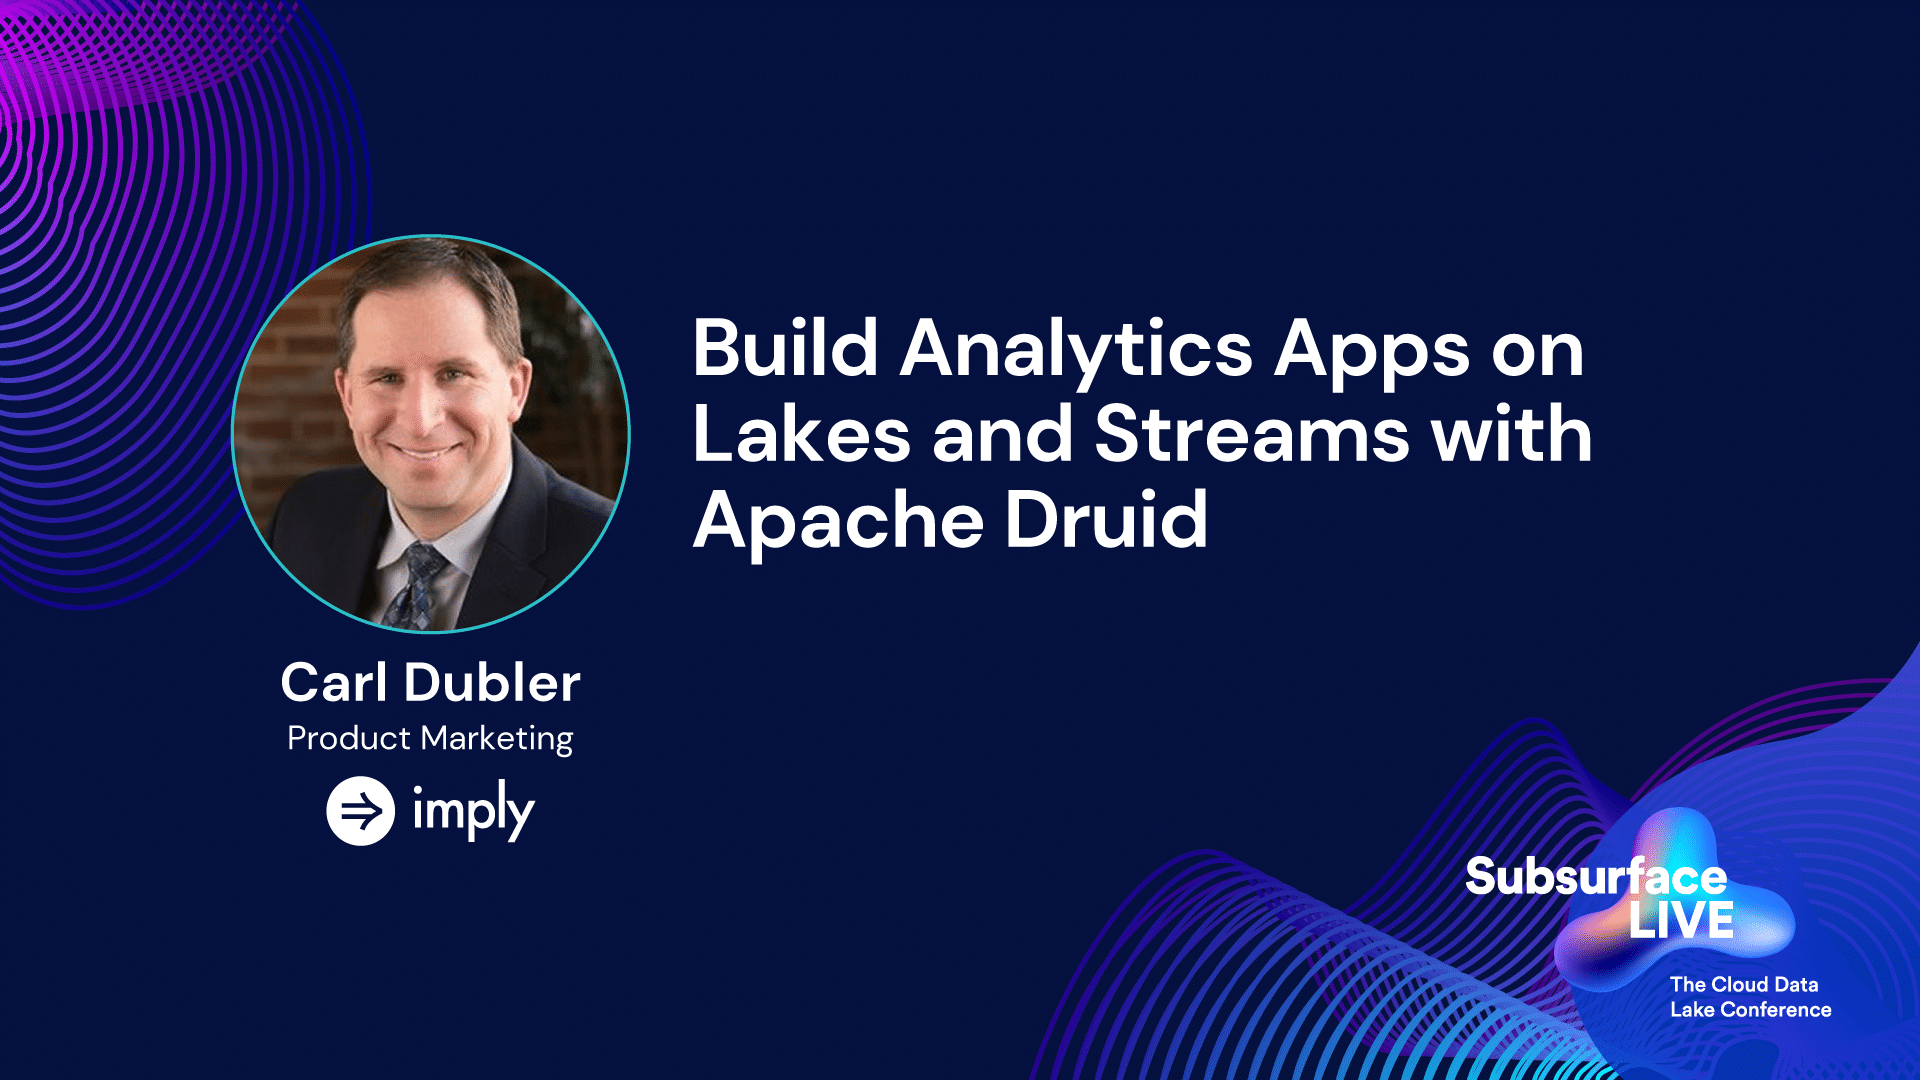 Build analytics apps on lakes and streams with Apache Druid